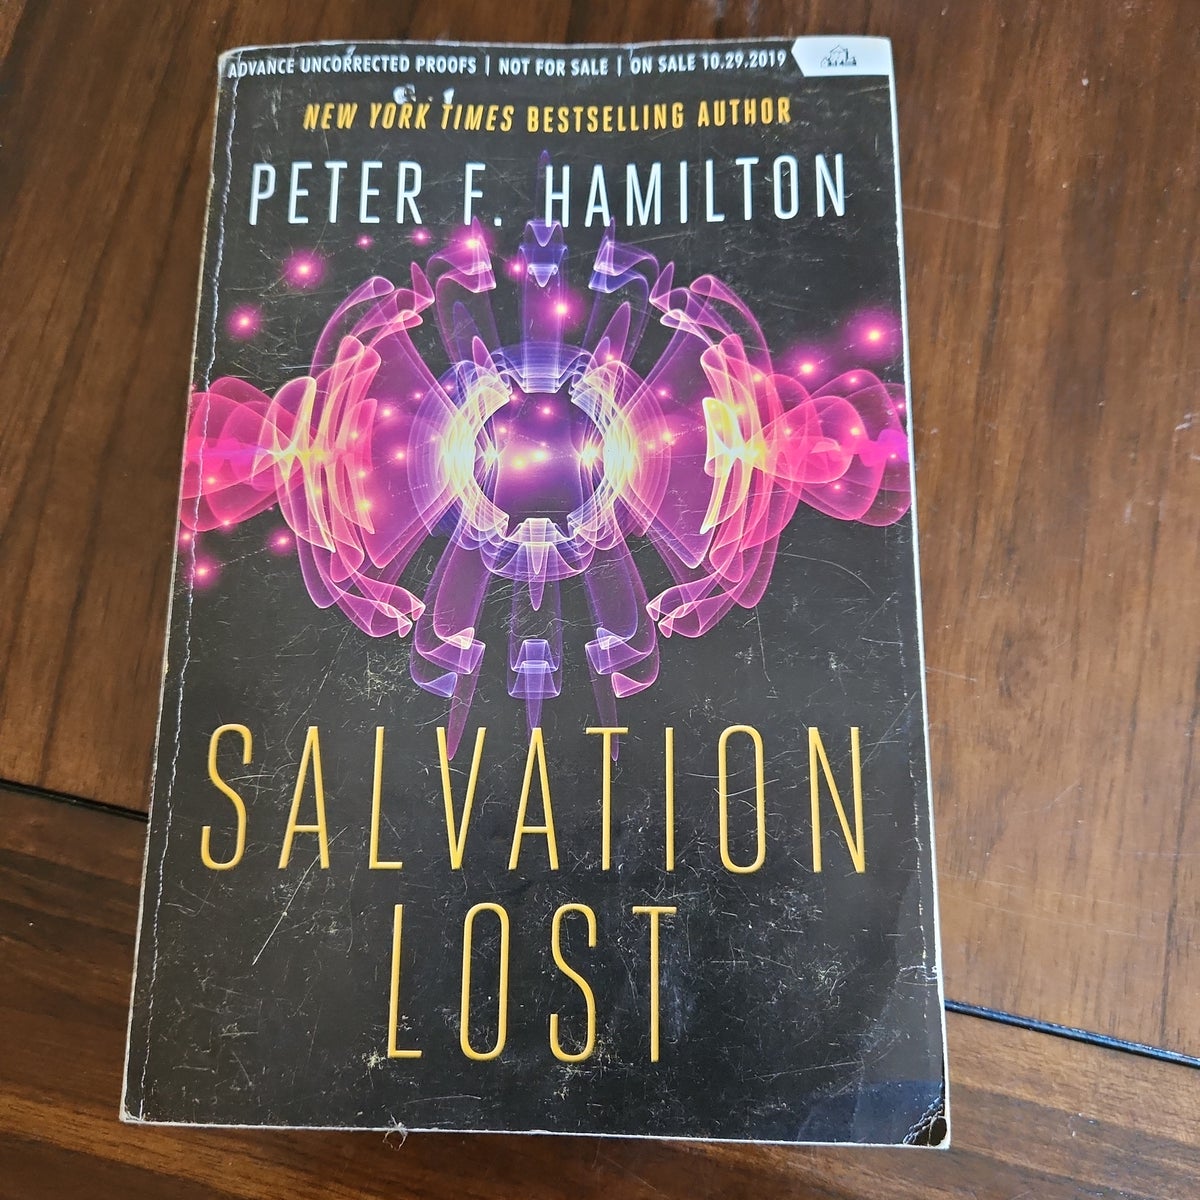 Light Chaser by Peter F. Hamilton